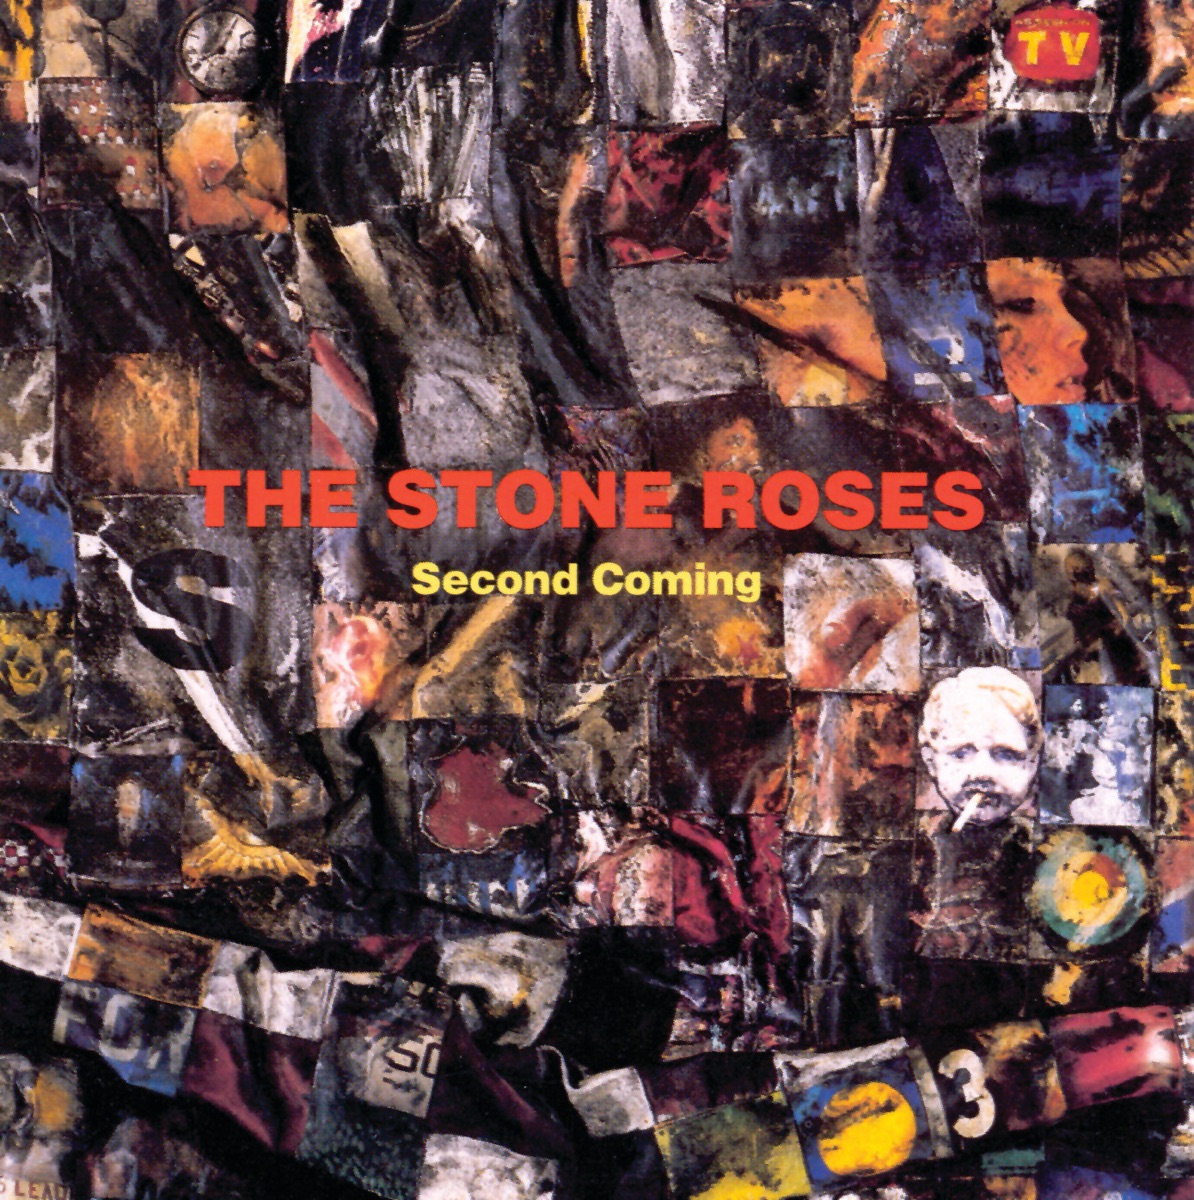 The Very Best of the Stone Roses - Album by The Stone Roses 